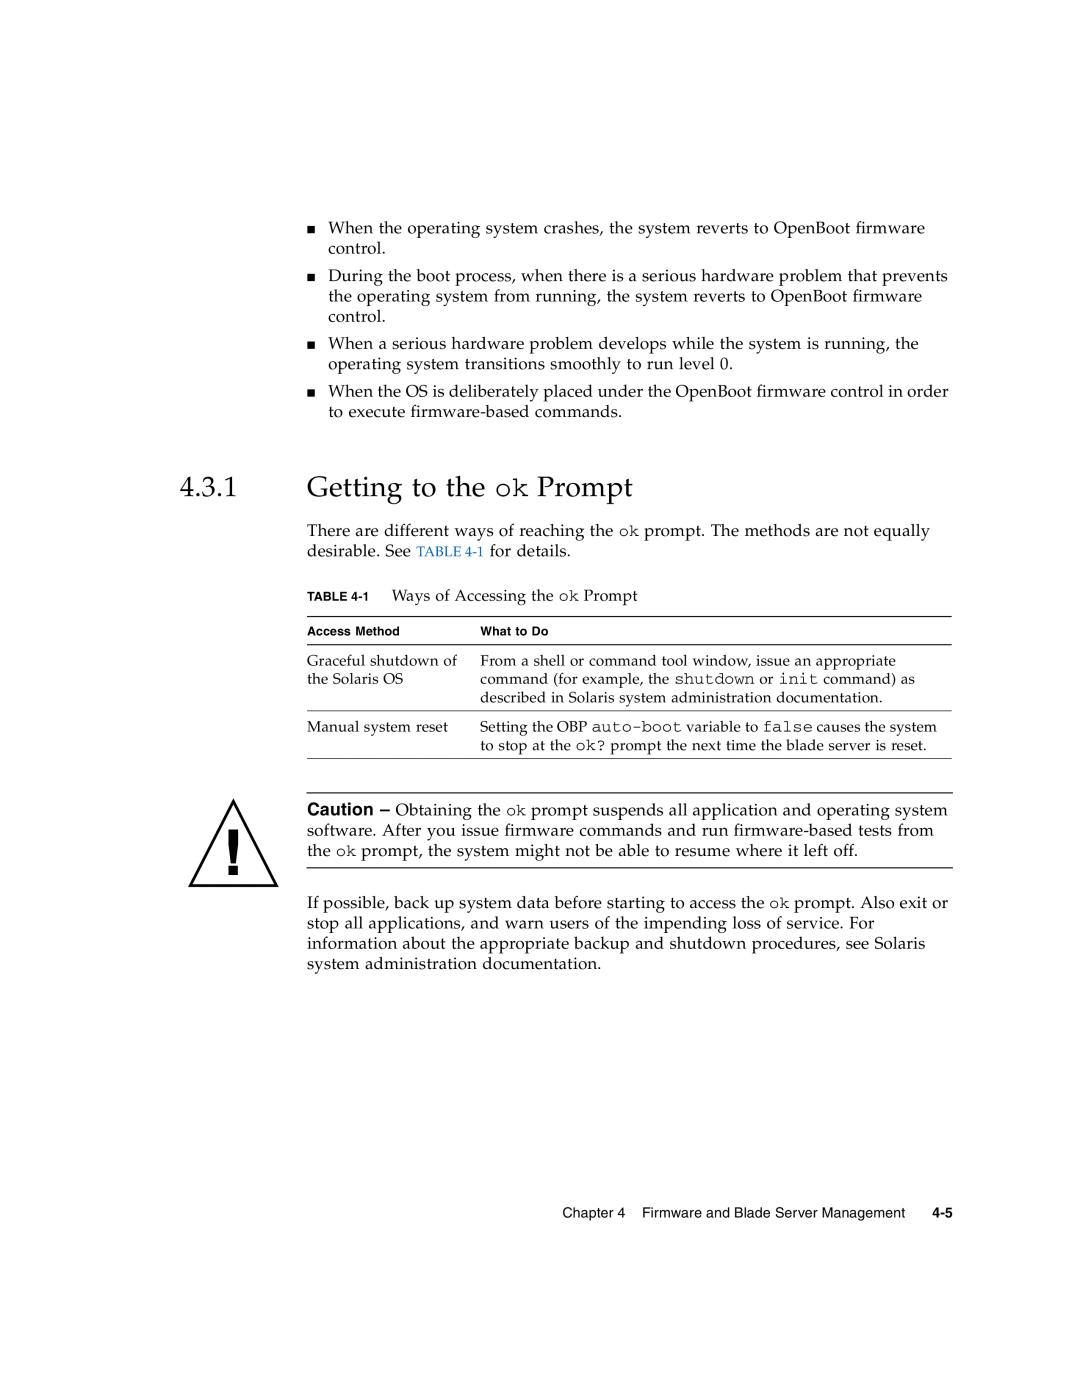 Sun Microsystems CP3260 manual Getting to the ok Prompt, 1 Ways of Accessing the ok Prompt 